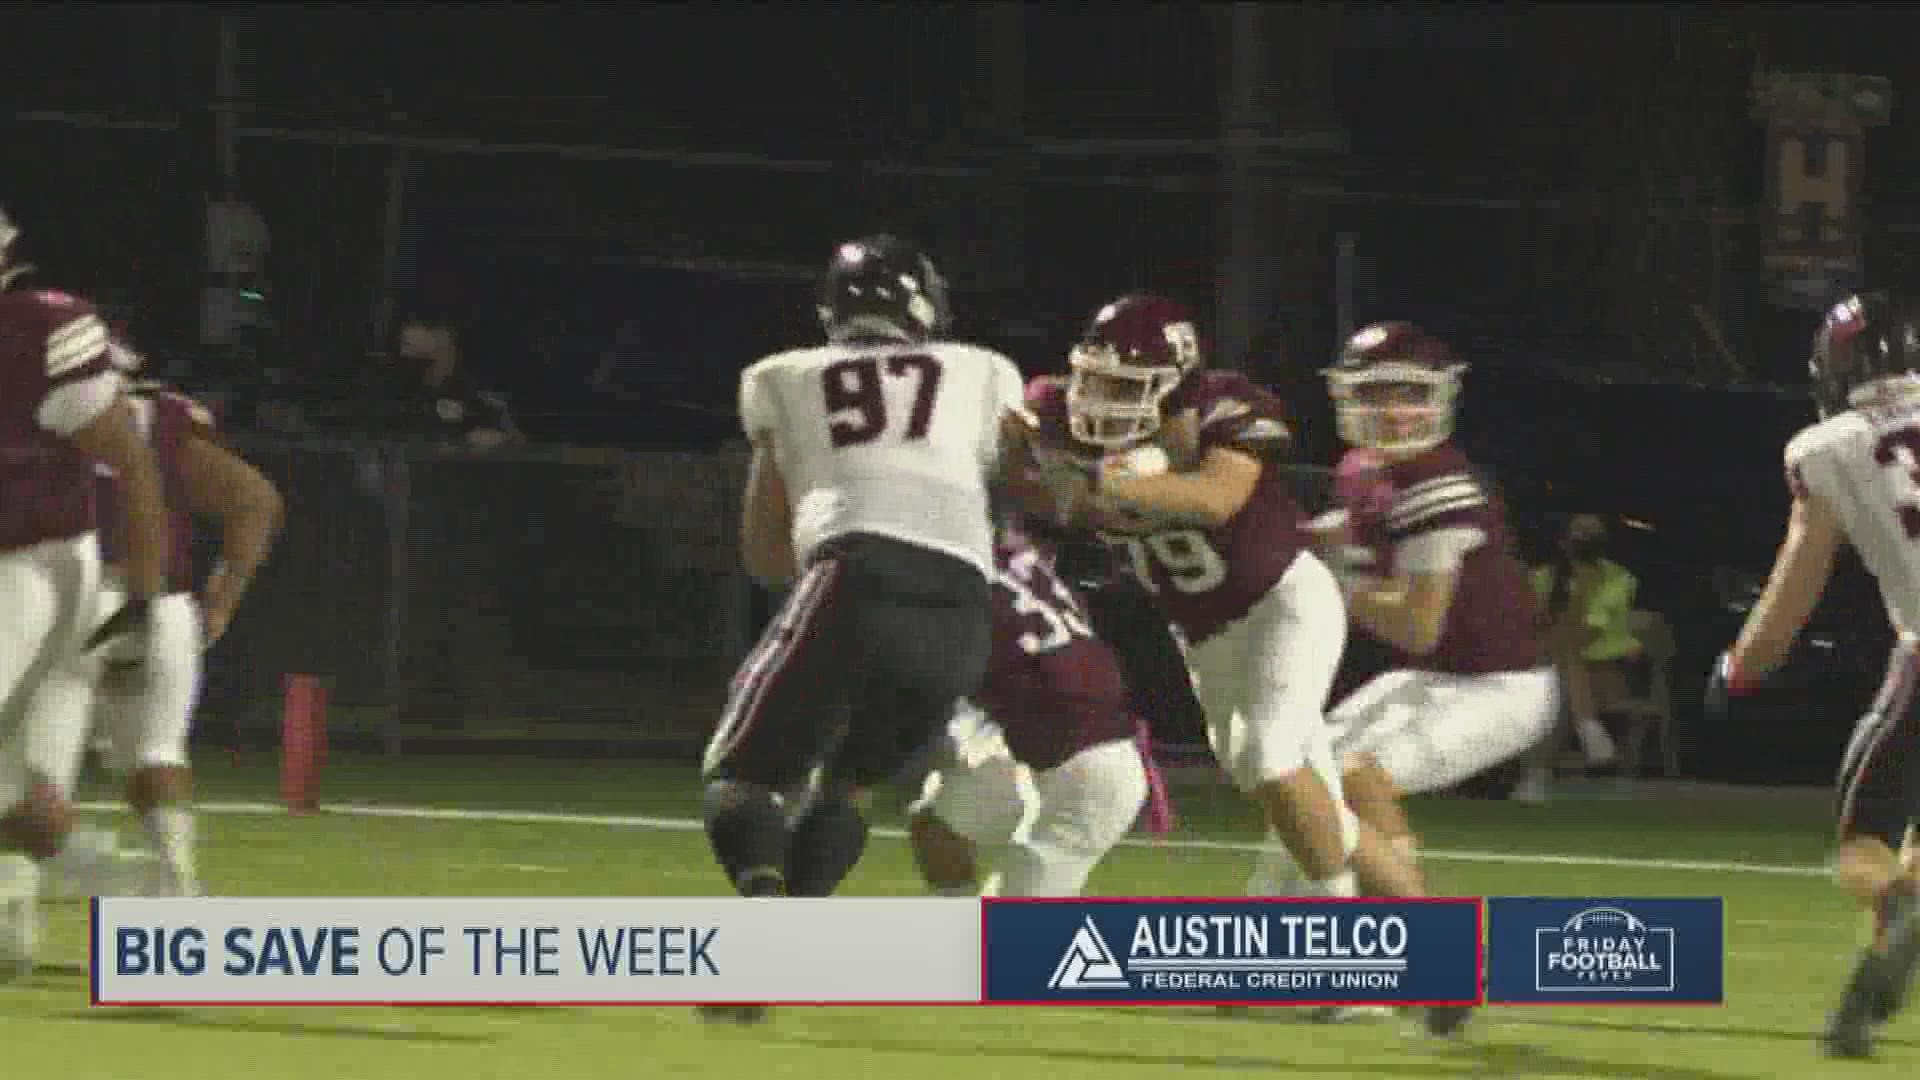 Here are our favorite plays of the week in Central Texas!